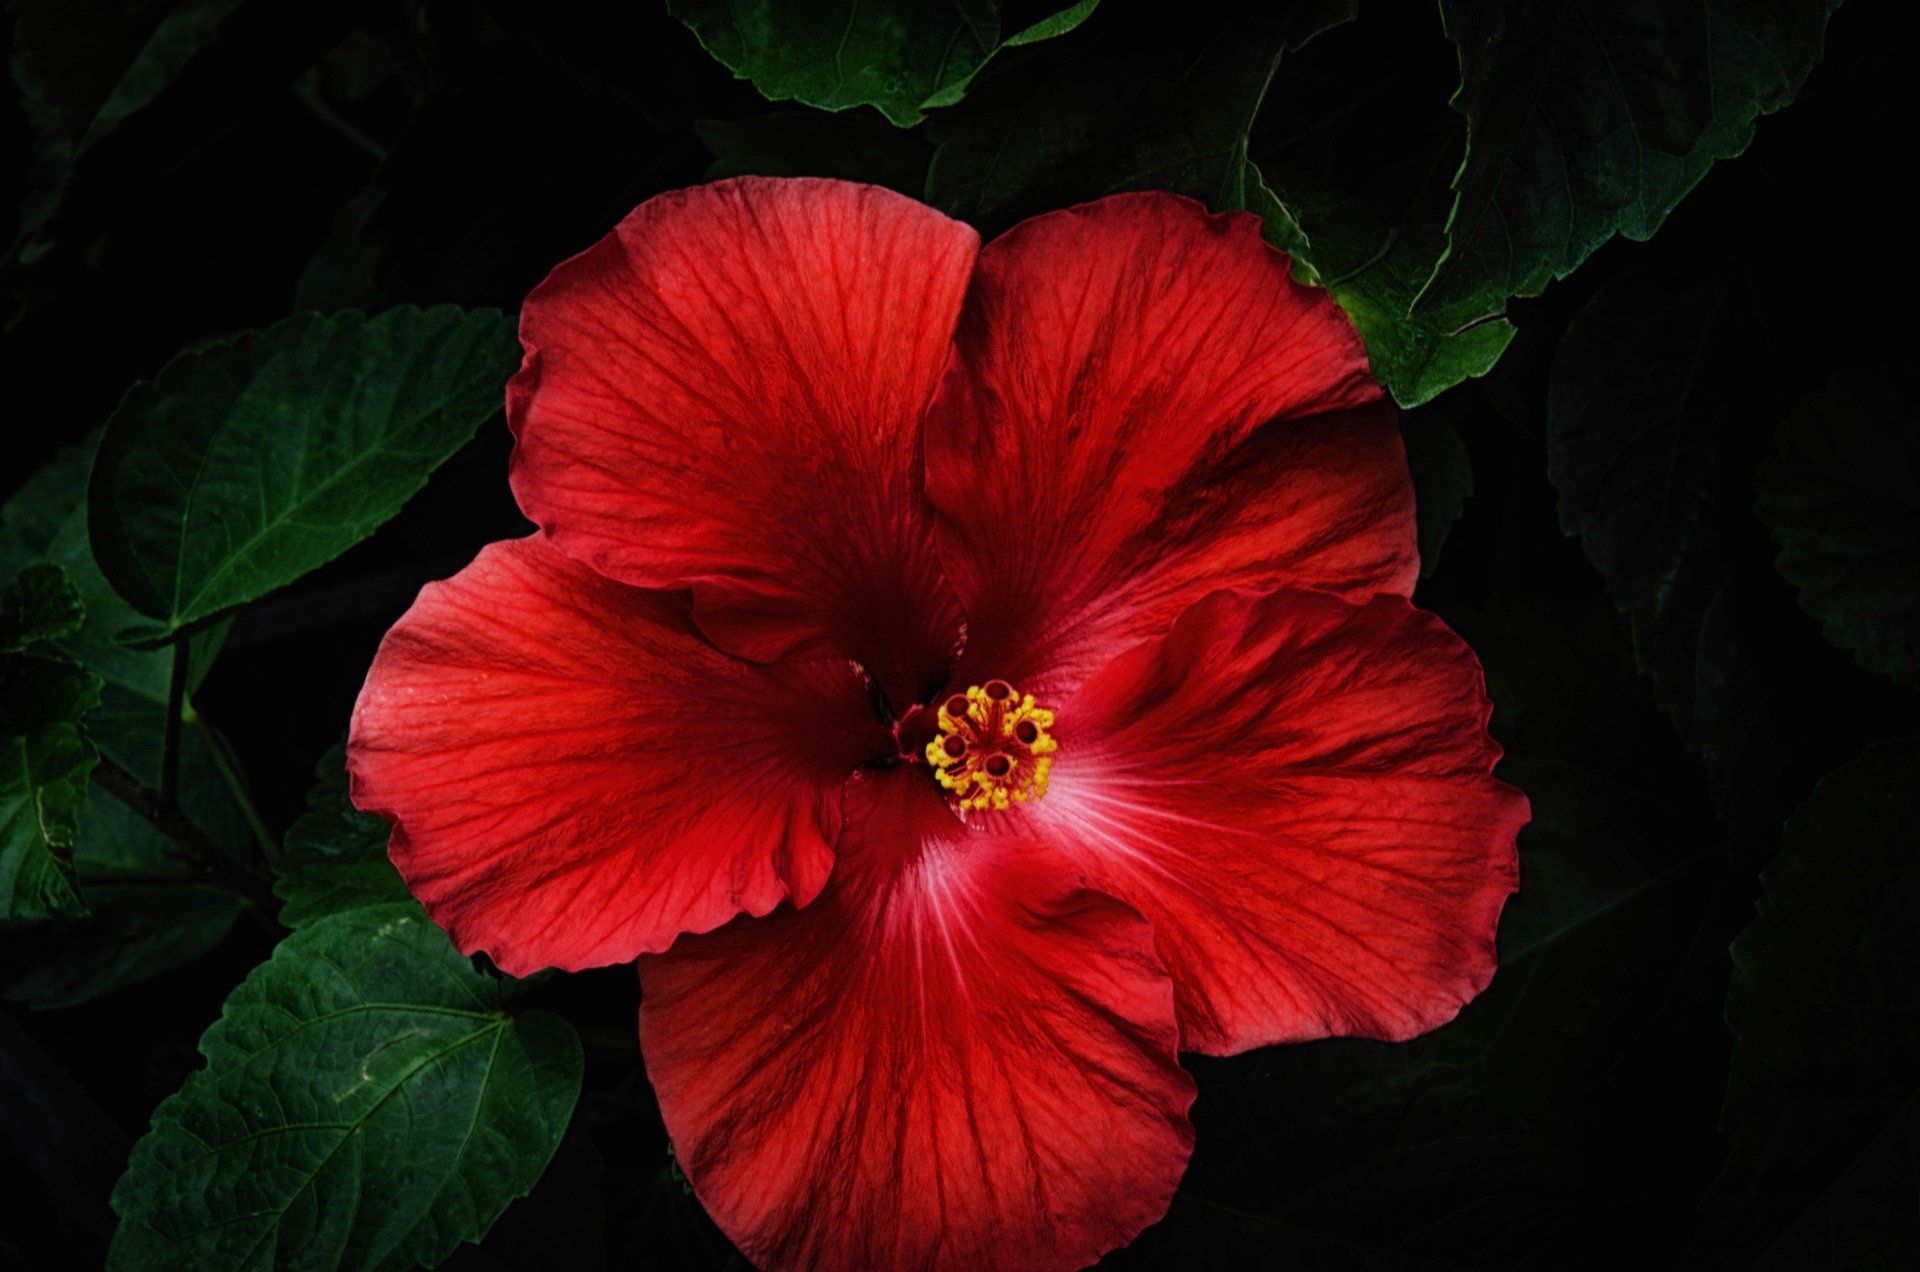 4k Ultra HD hibiscus wallpapers, Background images, Floral beauty, Serene nature, 1920x1280 HD Desktop